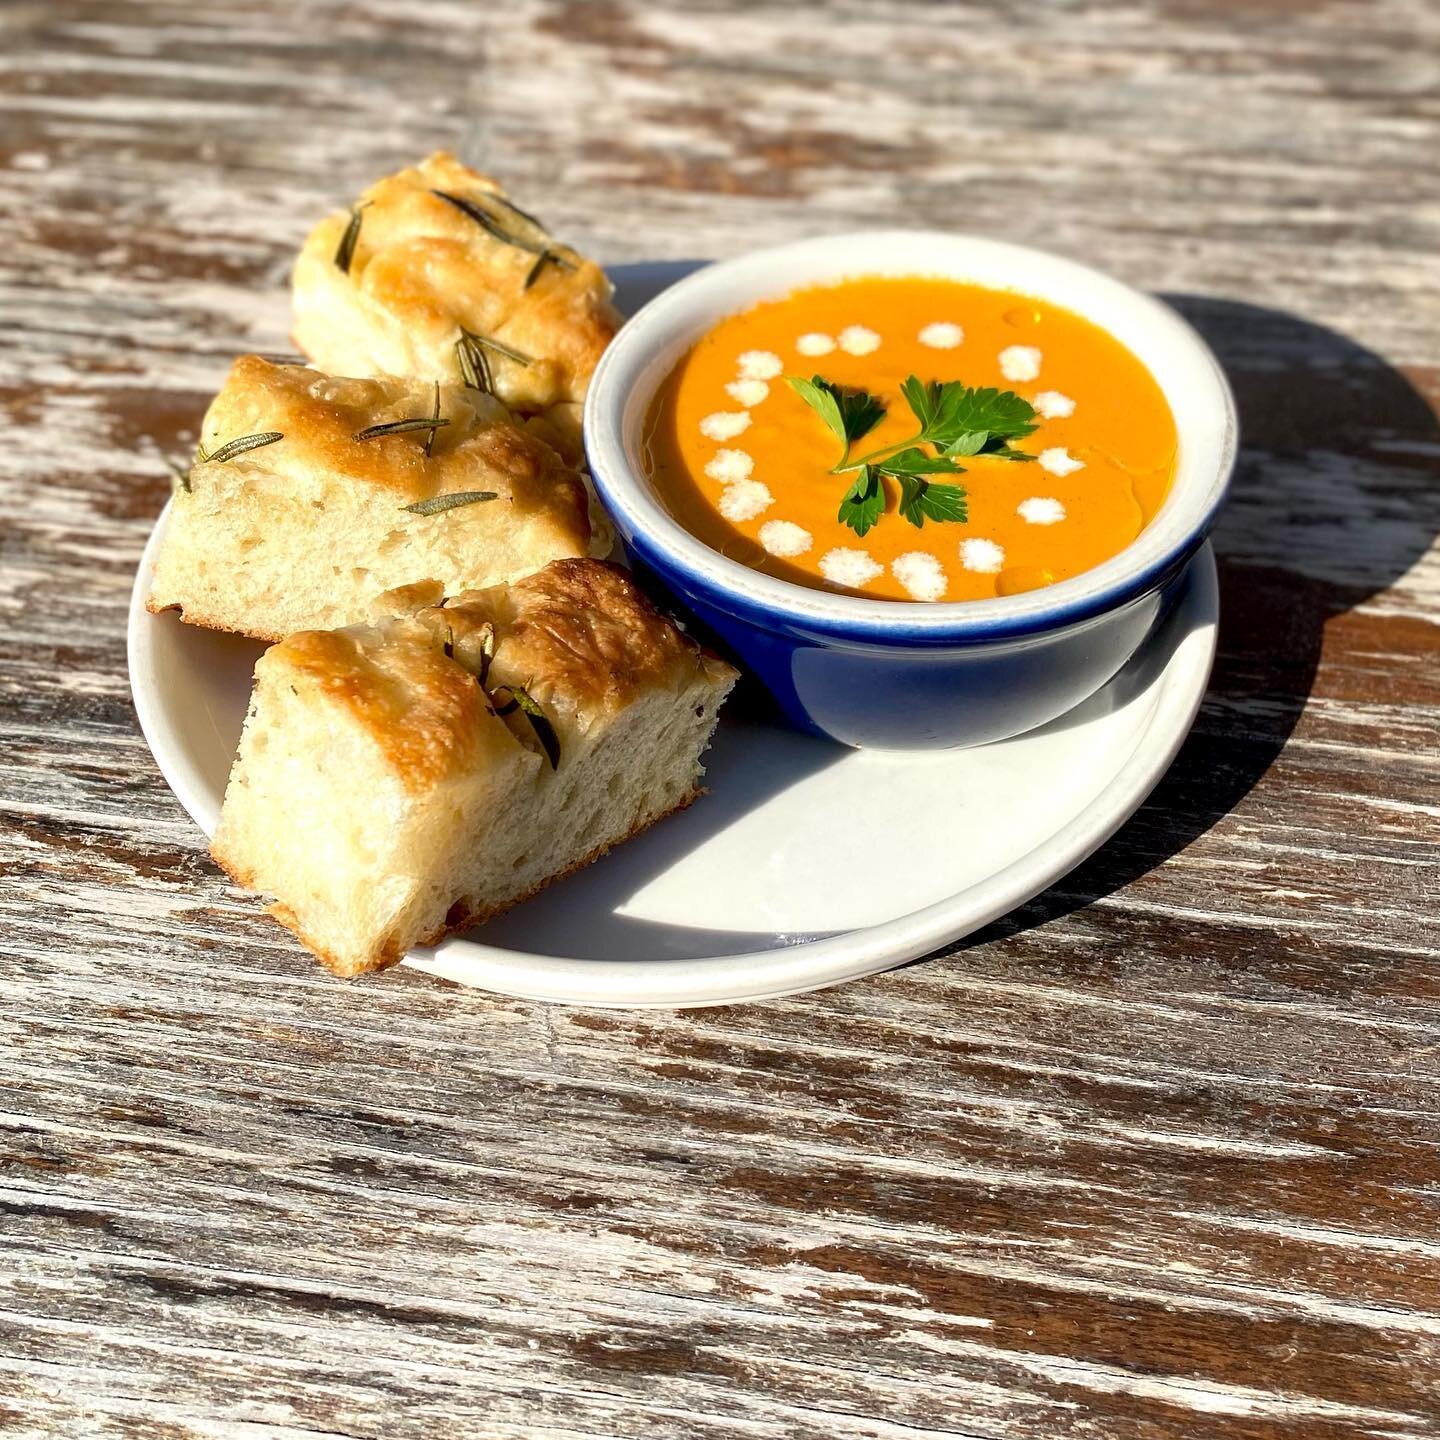 Pedro&rsquo;s Tomato Bisque is back! Come give it a try and let him know how much you love it.
.
.
.
#eastvillage #avenueb #nyc #nyceats #whatsonthetable #eatupnewyork #eeeeeats #feedfeed #newyorkcity #tinnedseafood #nycrestaurants #outdoordiningnyc 